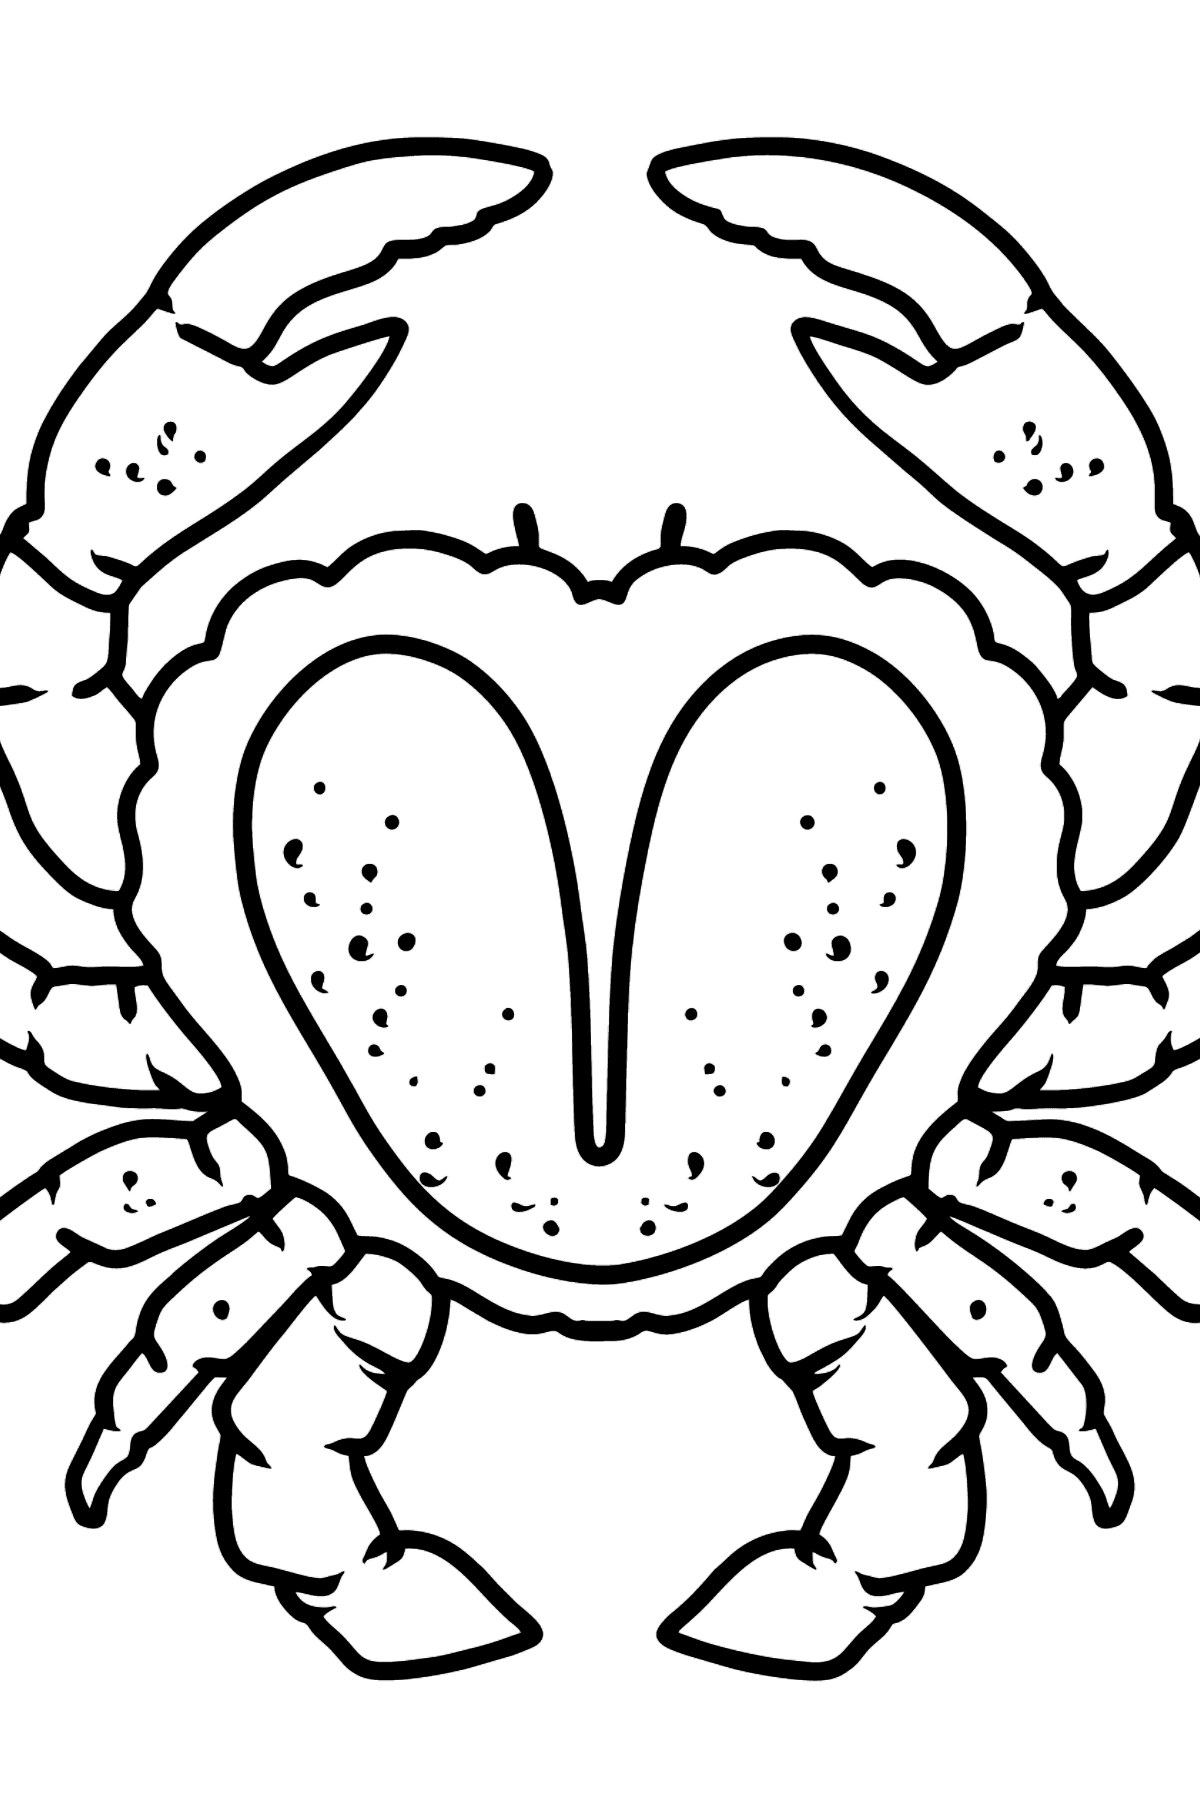 Crab coloring page - Coloring Pages for Kids